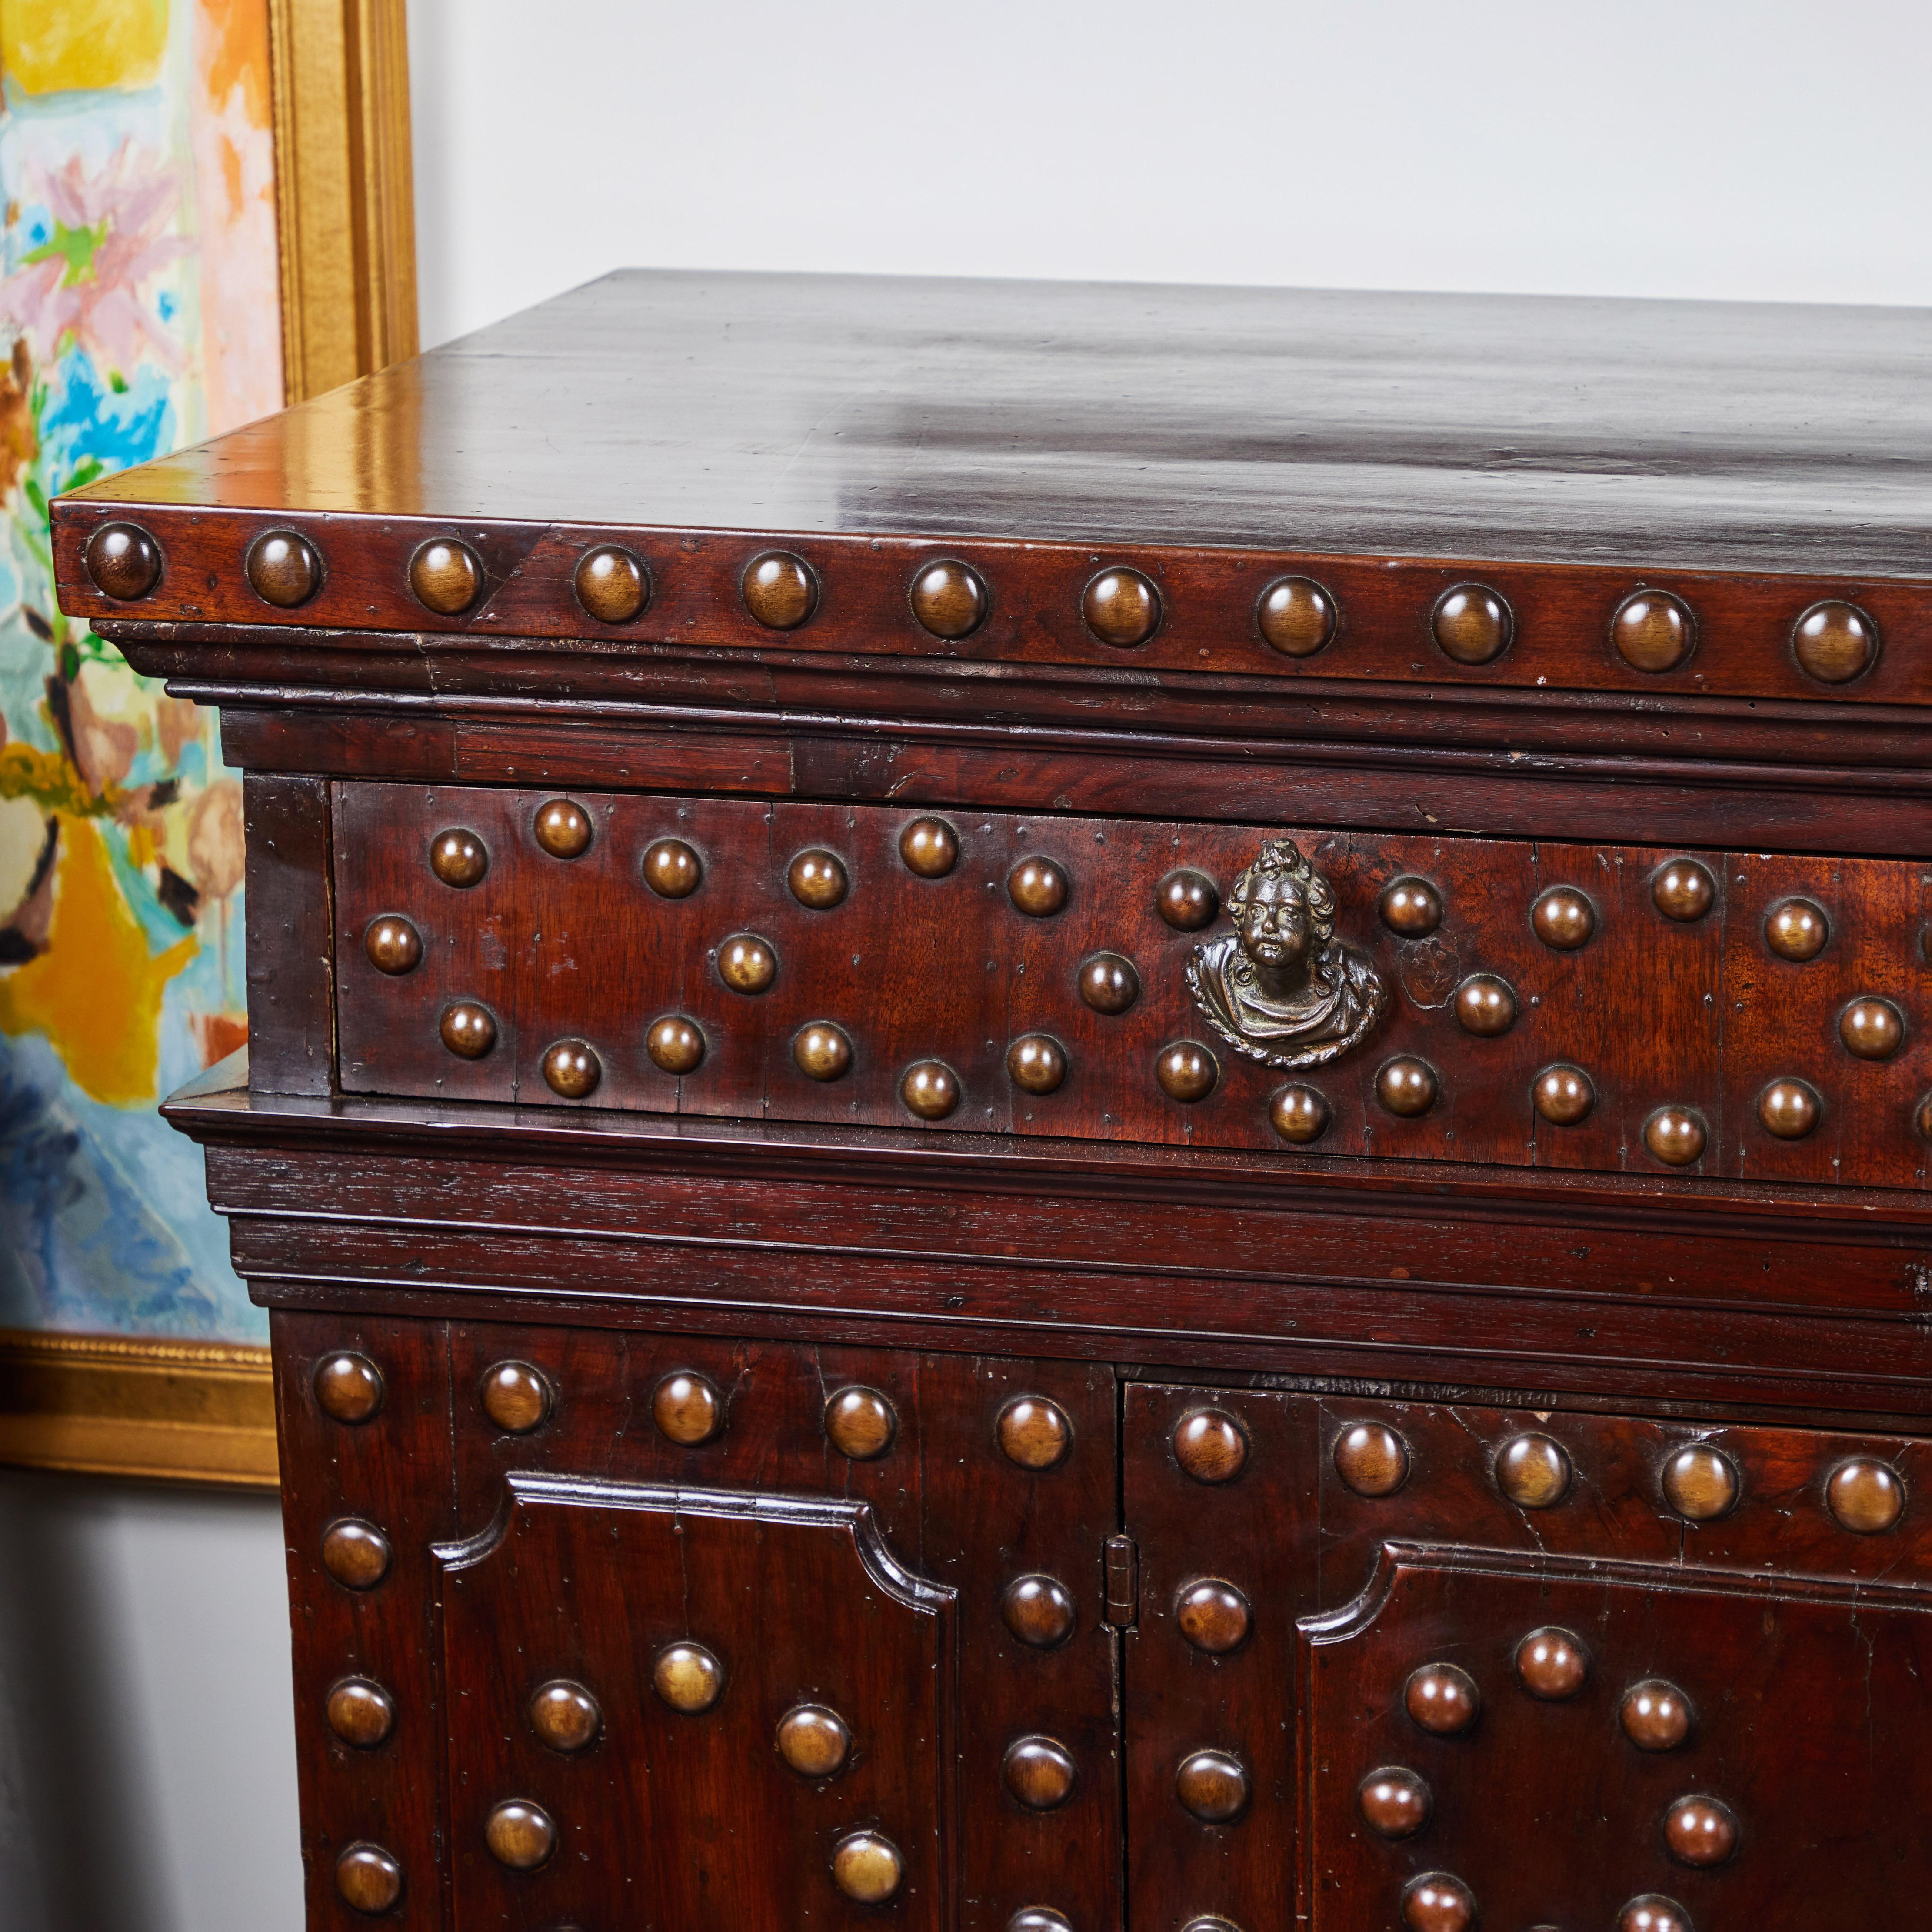 A handsome Tuscan walnut buffet with patinated bronze studs on the front with bronze cherub head knobs and raised panels on sides. One drawer, 2 doors. One interior shelf.